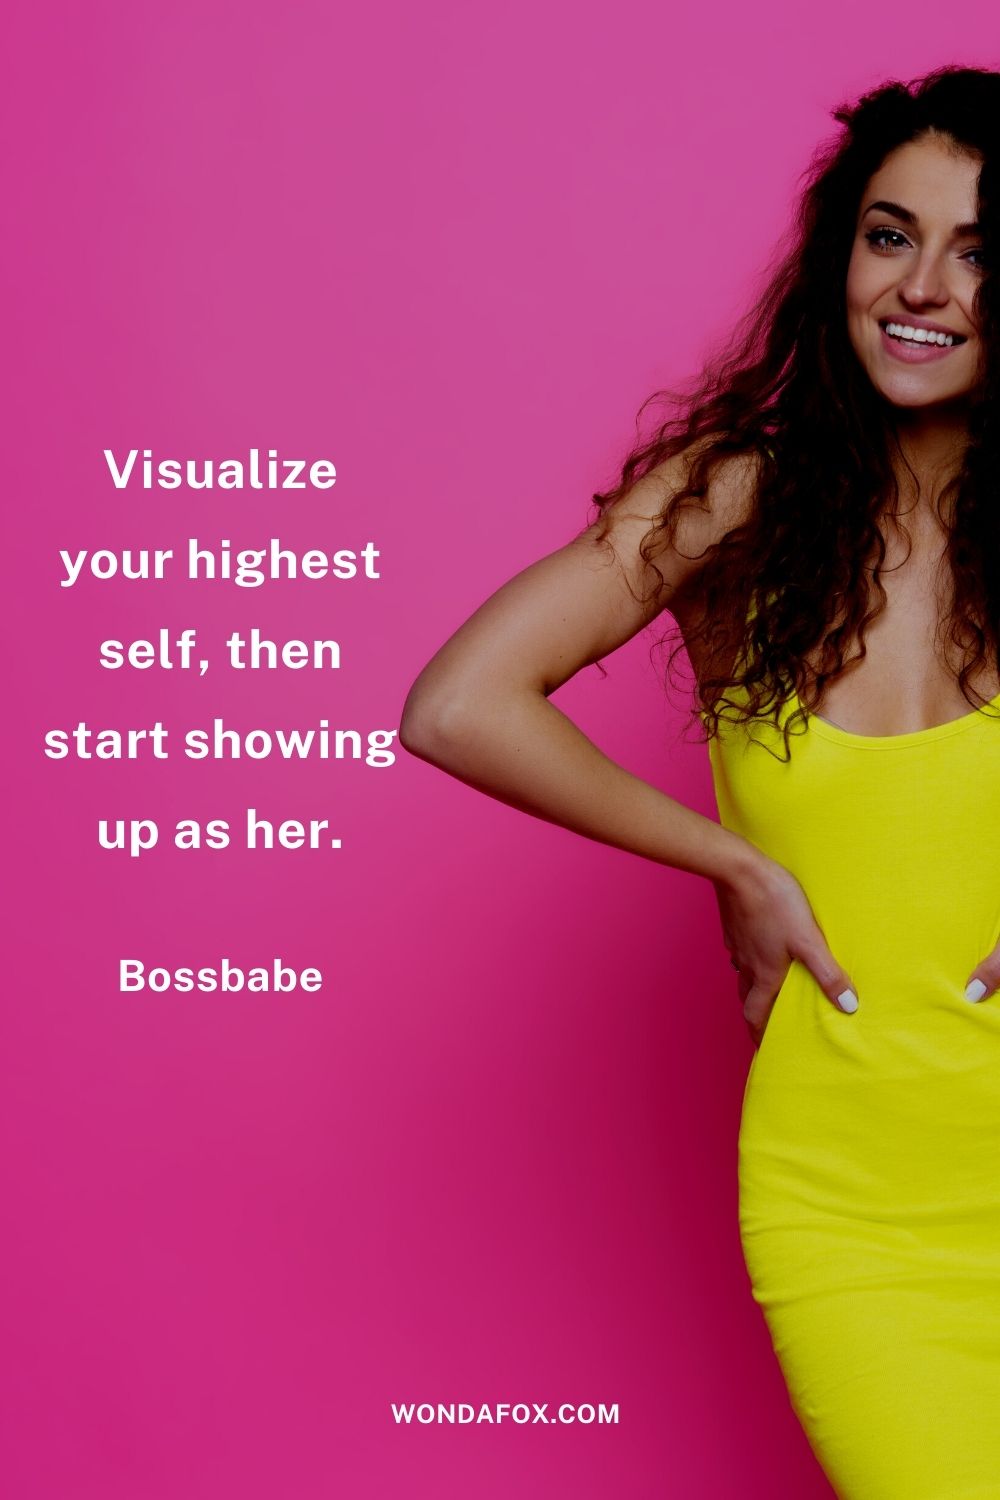 Visualize your highest self, then start showing up as her.